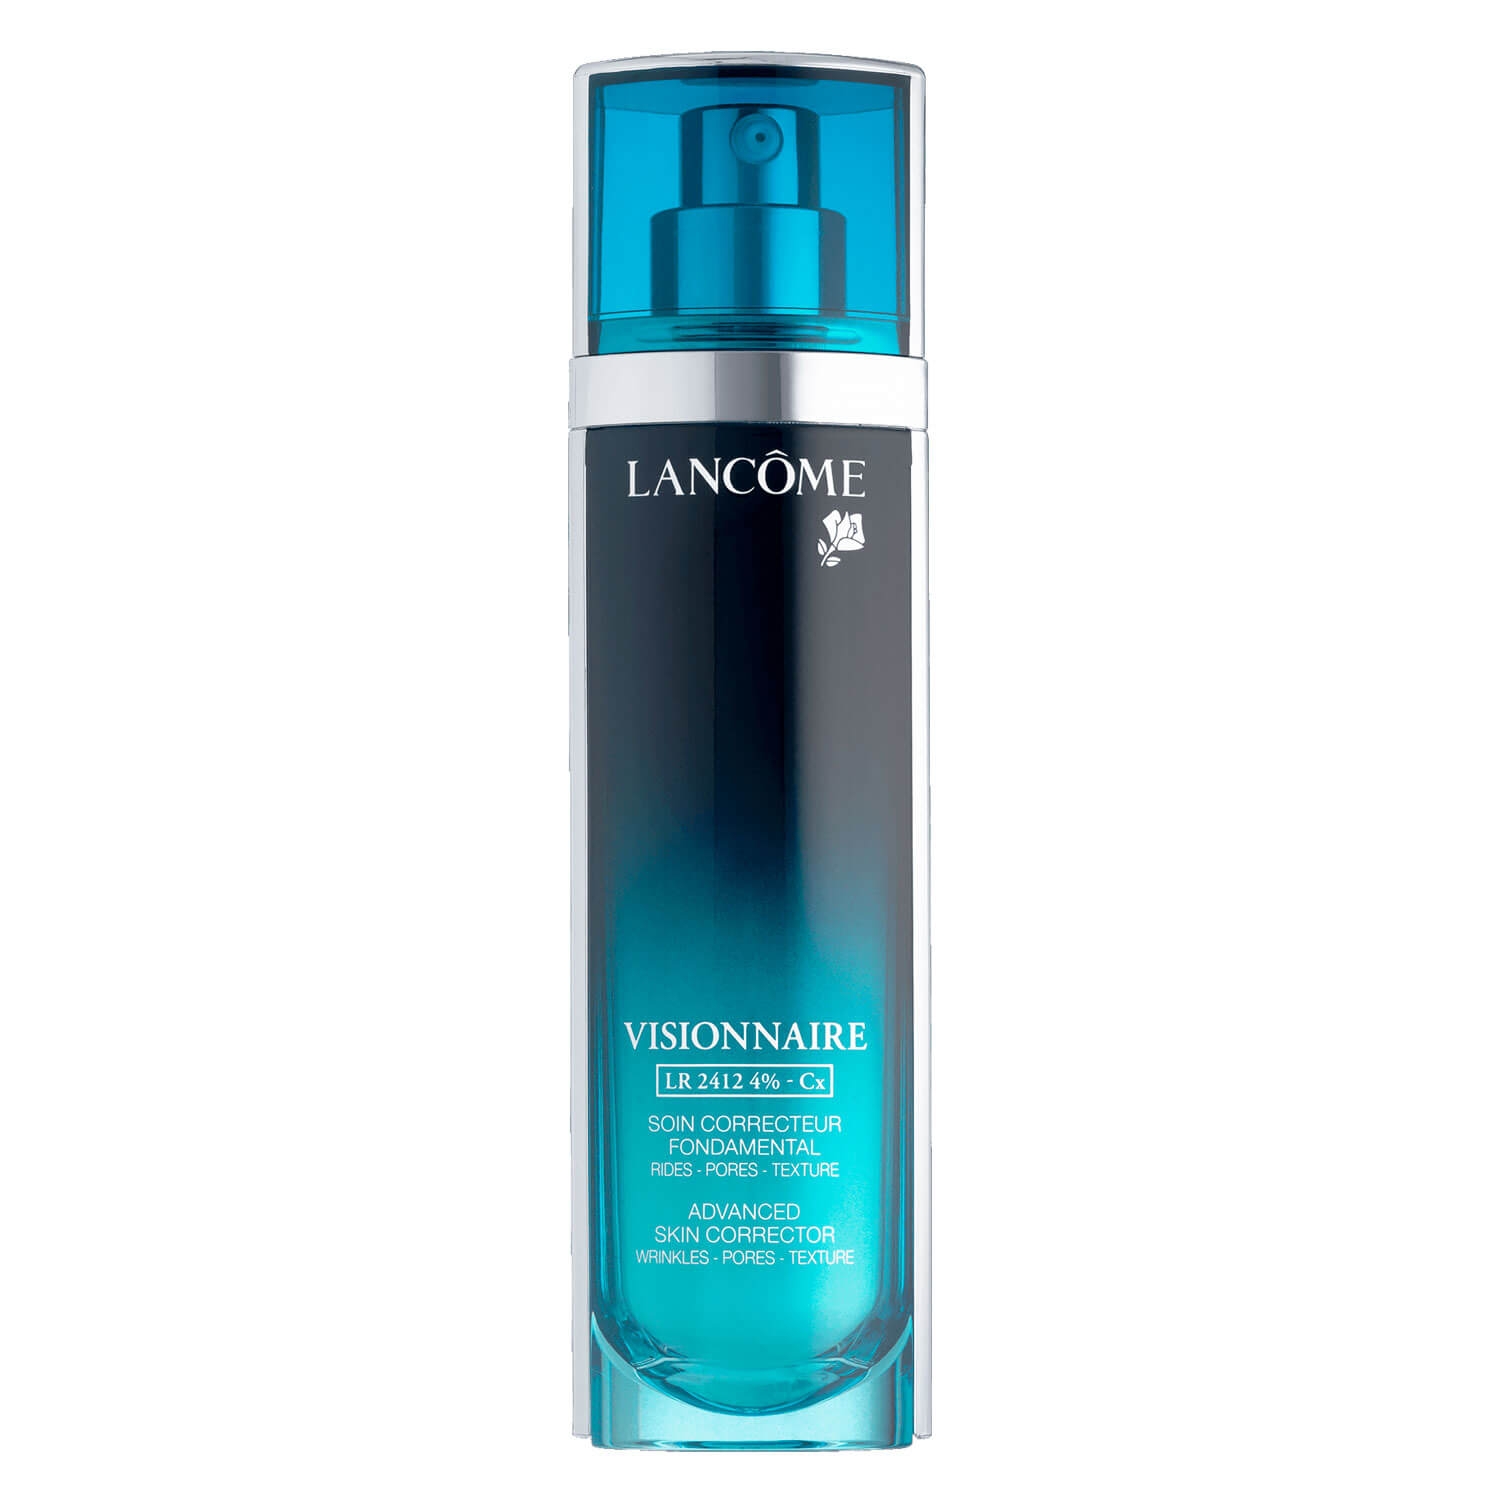 Product image from Visionnaire - [LR 2412 4% - Cx]